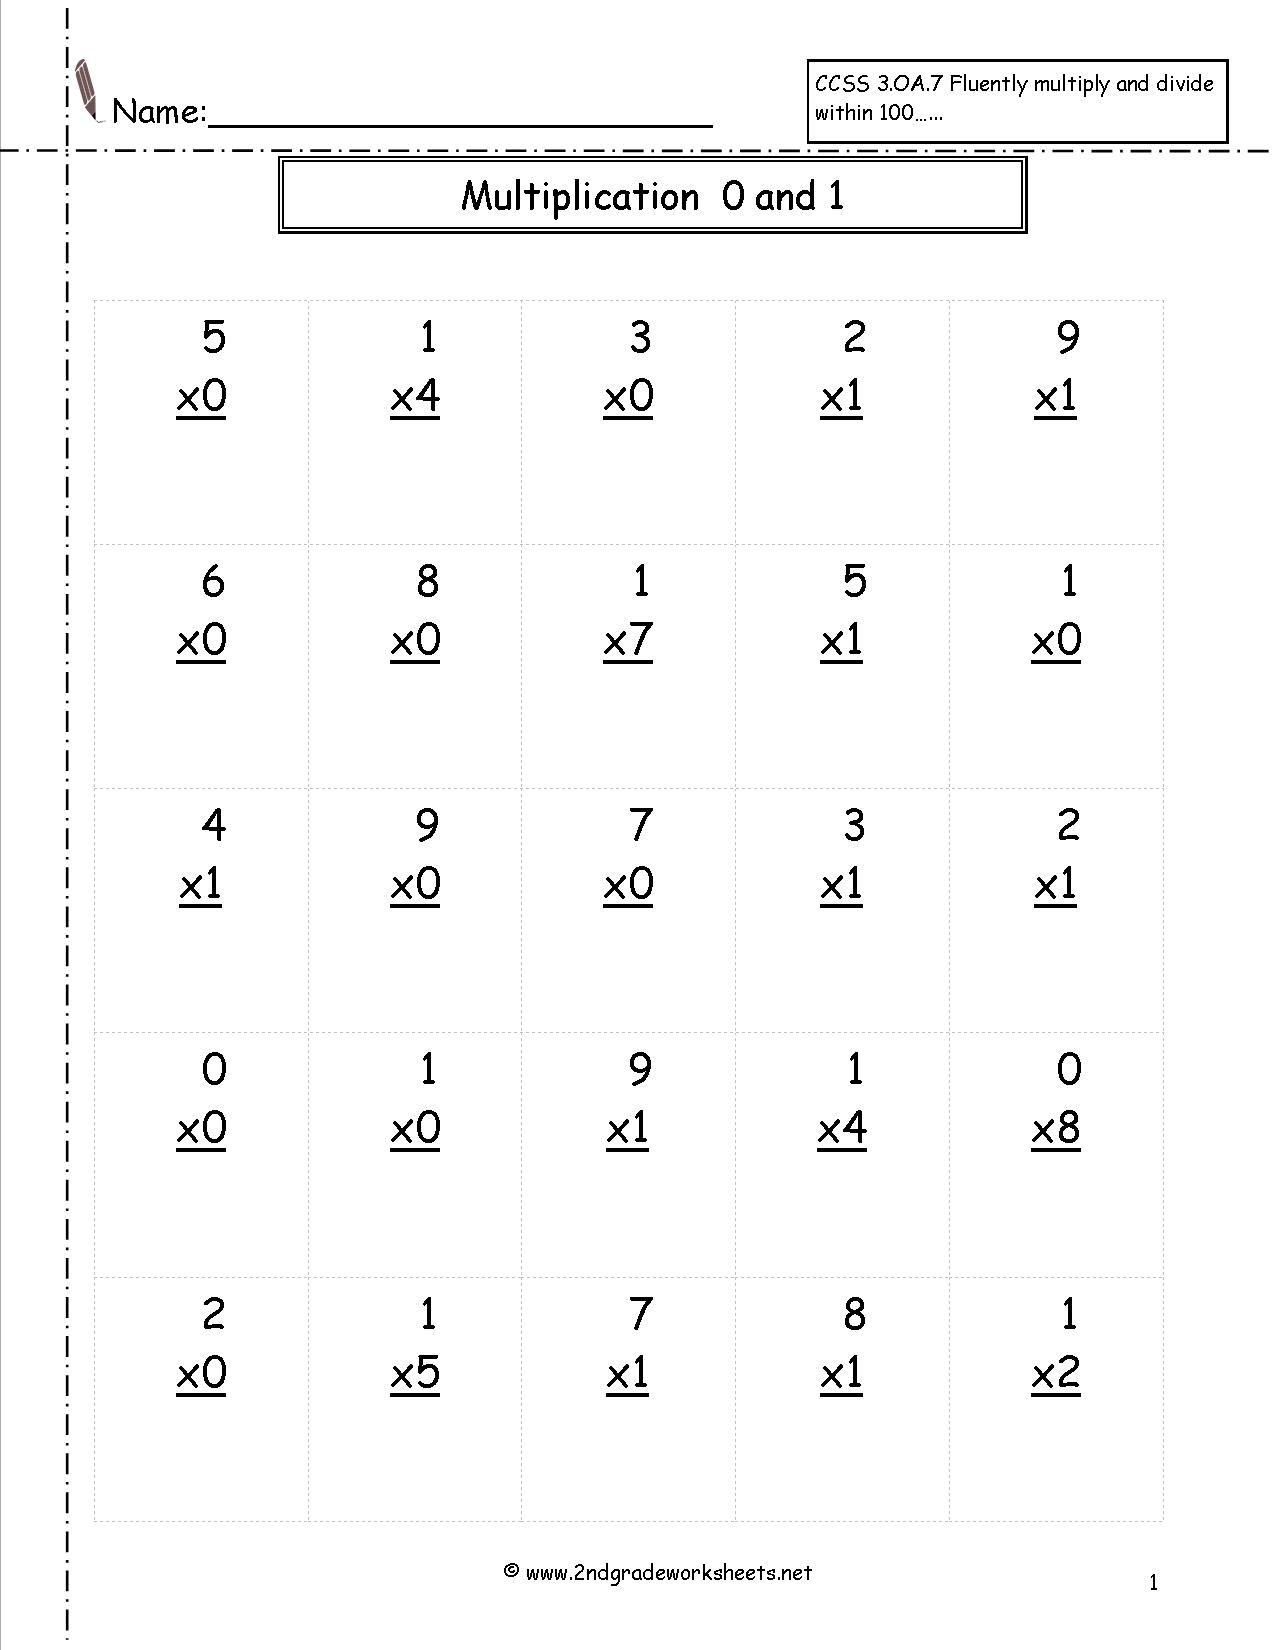 Multiplication Worksheets And Printouts intended for Printable Multiplication Practice Pages